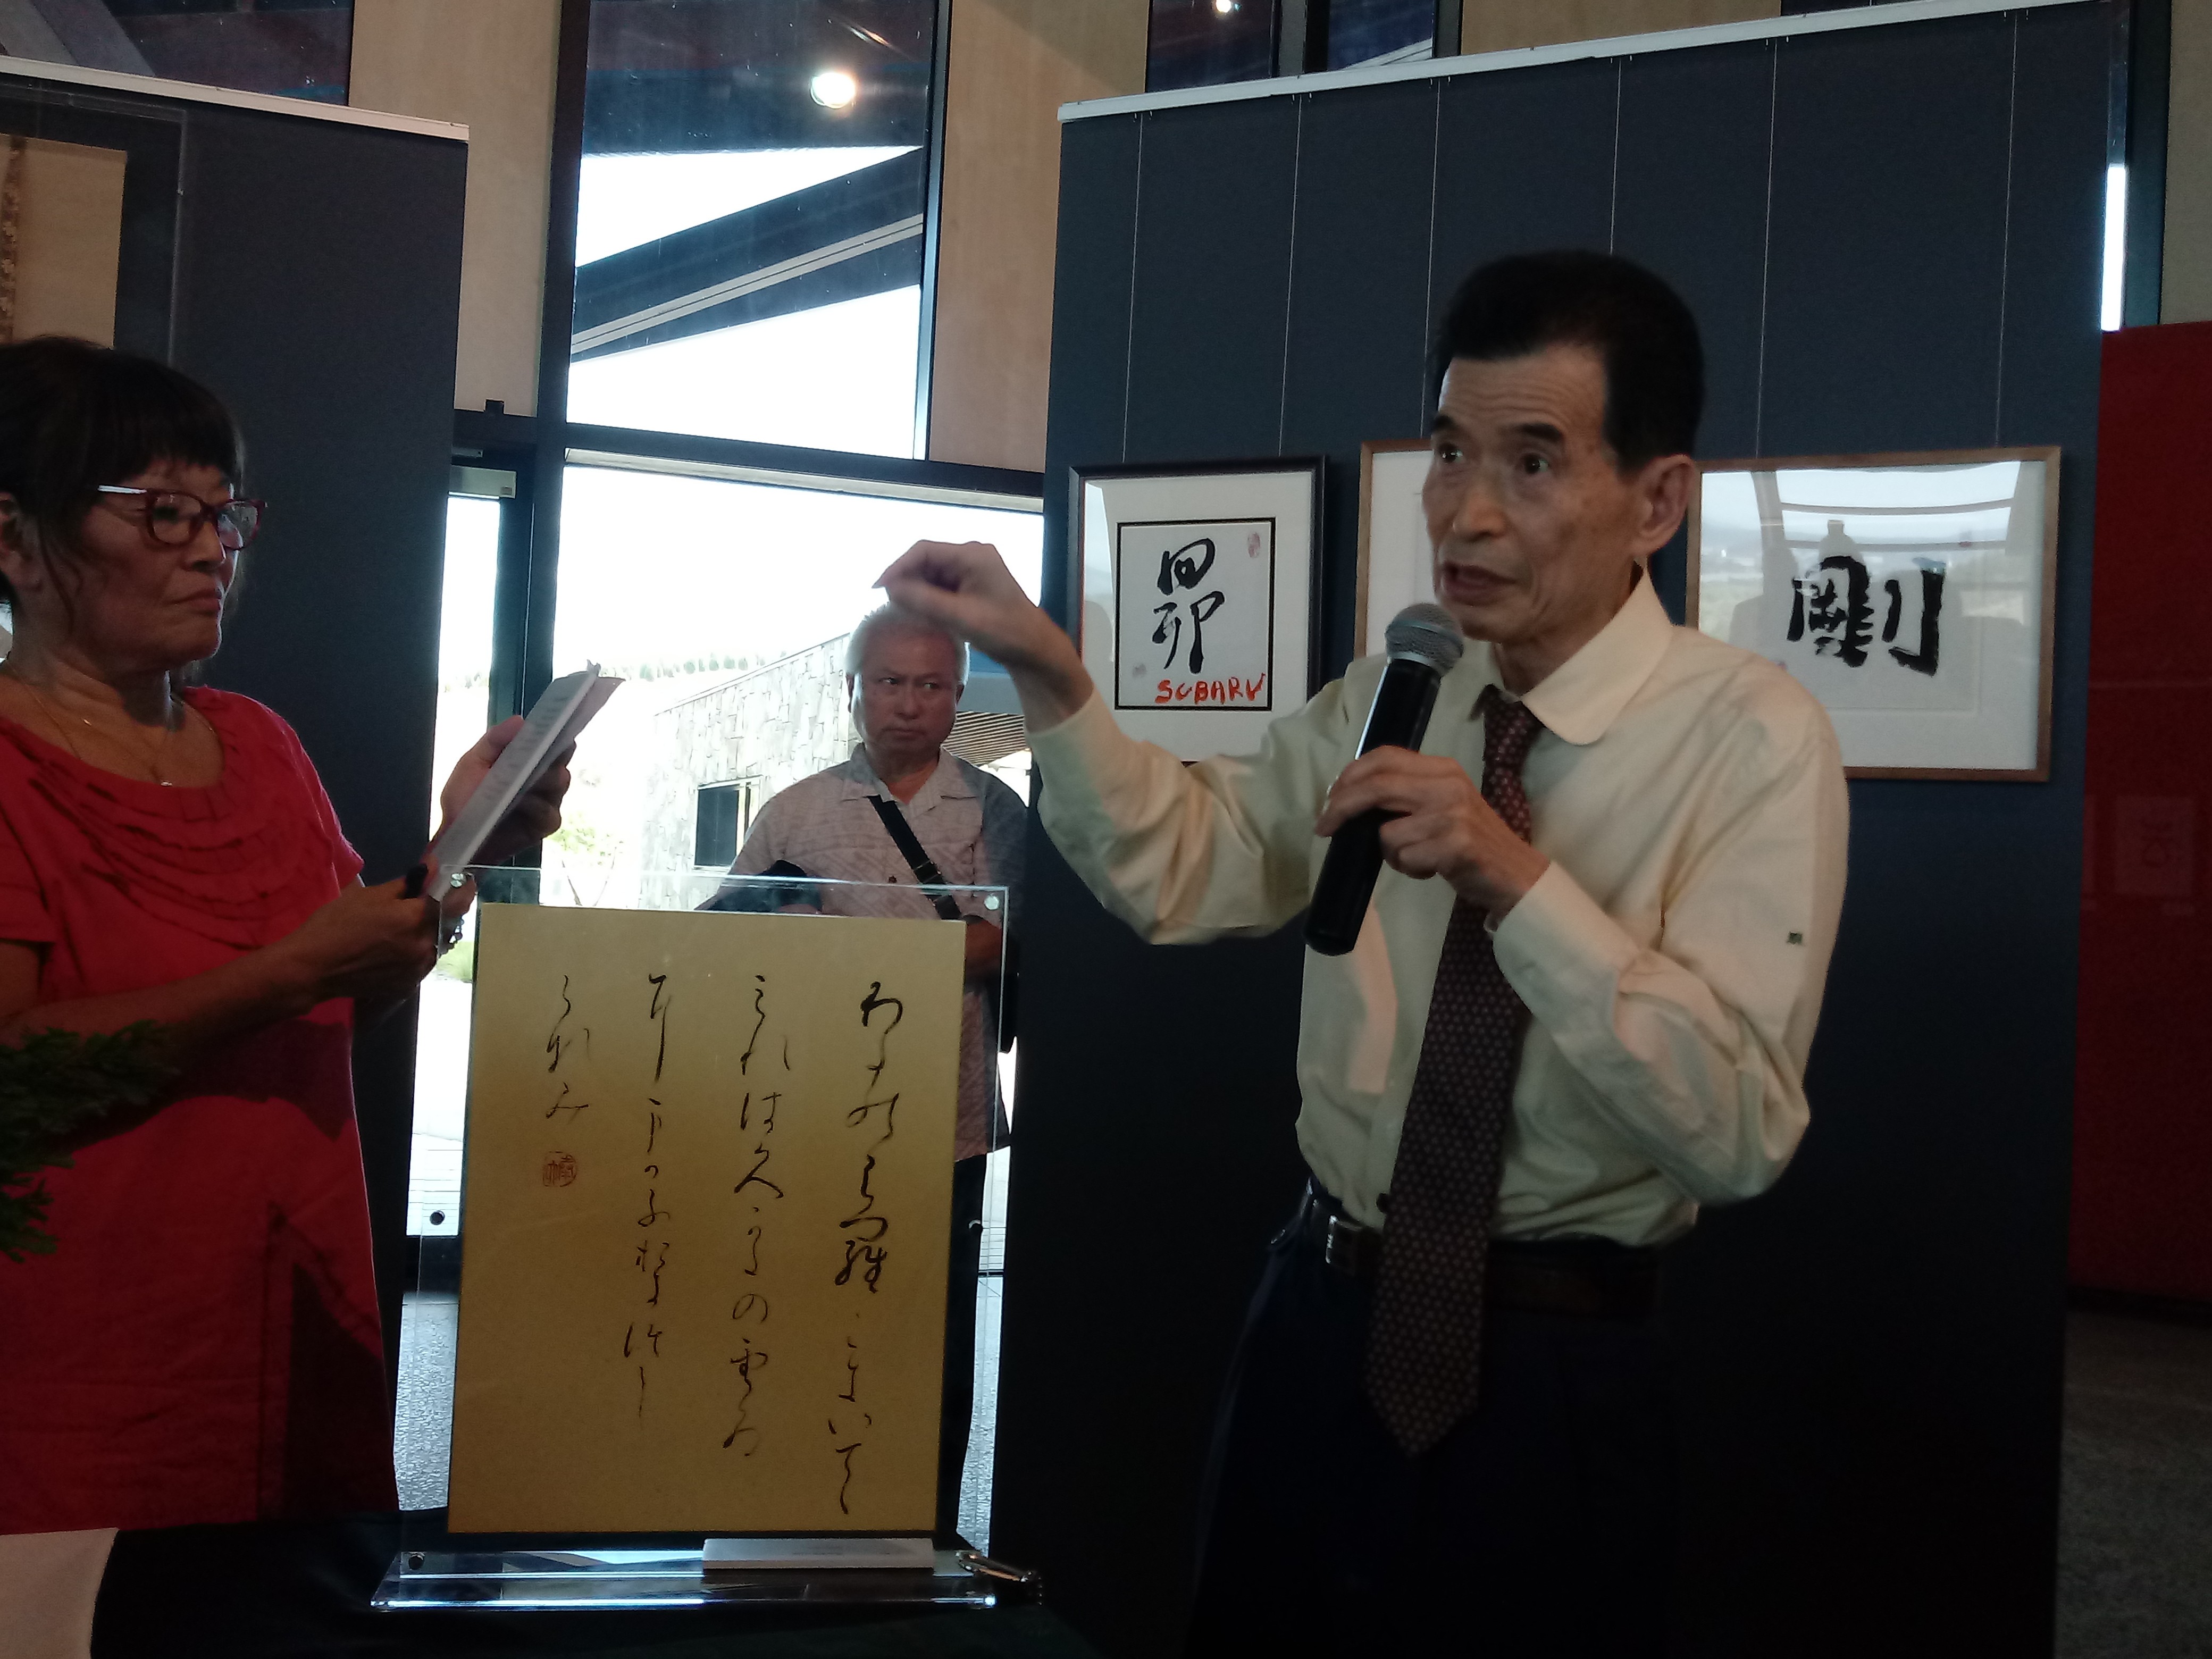 Modern Japanese calligraphy exhibition launched at Arboretum